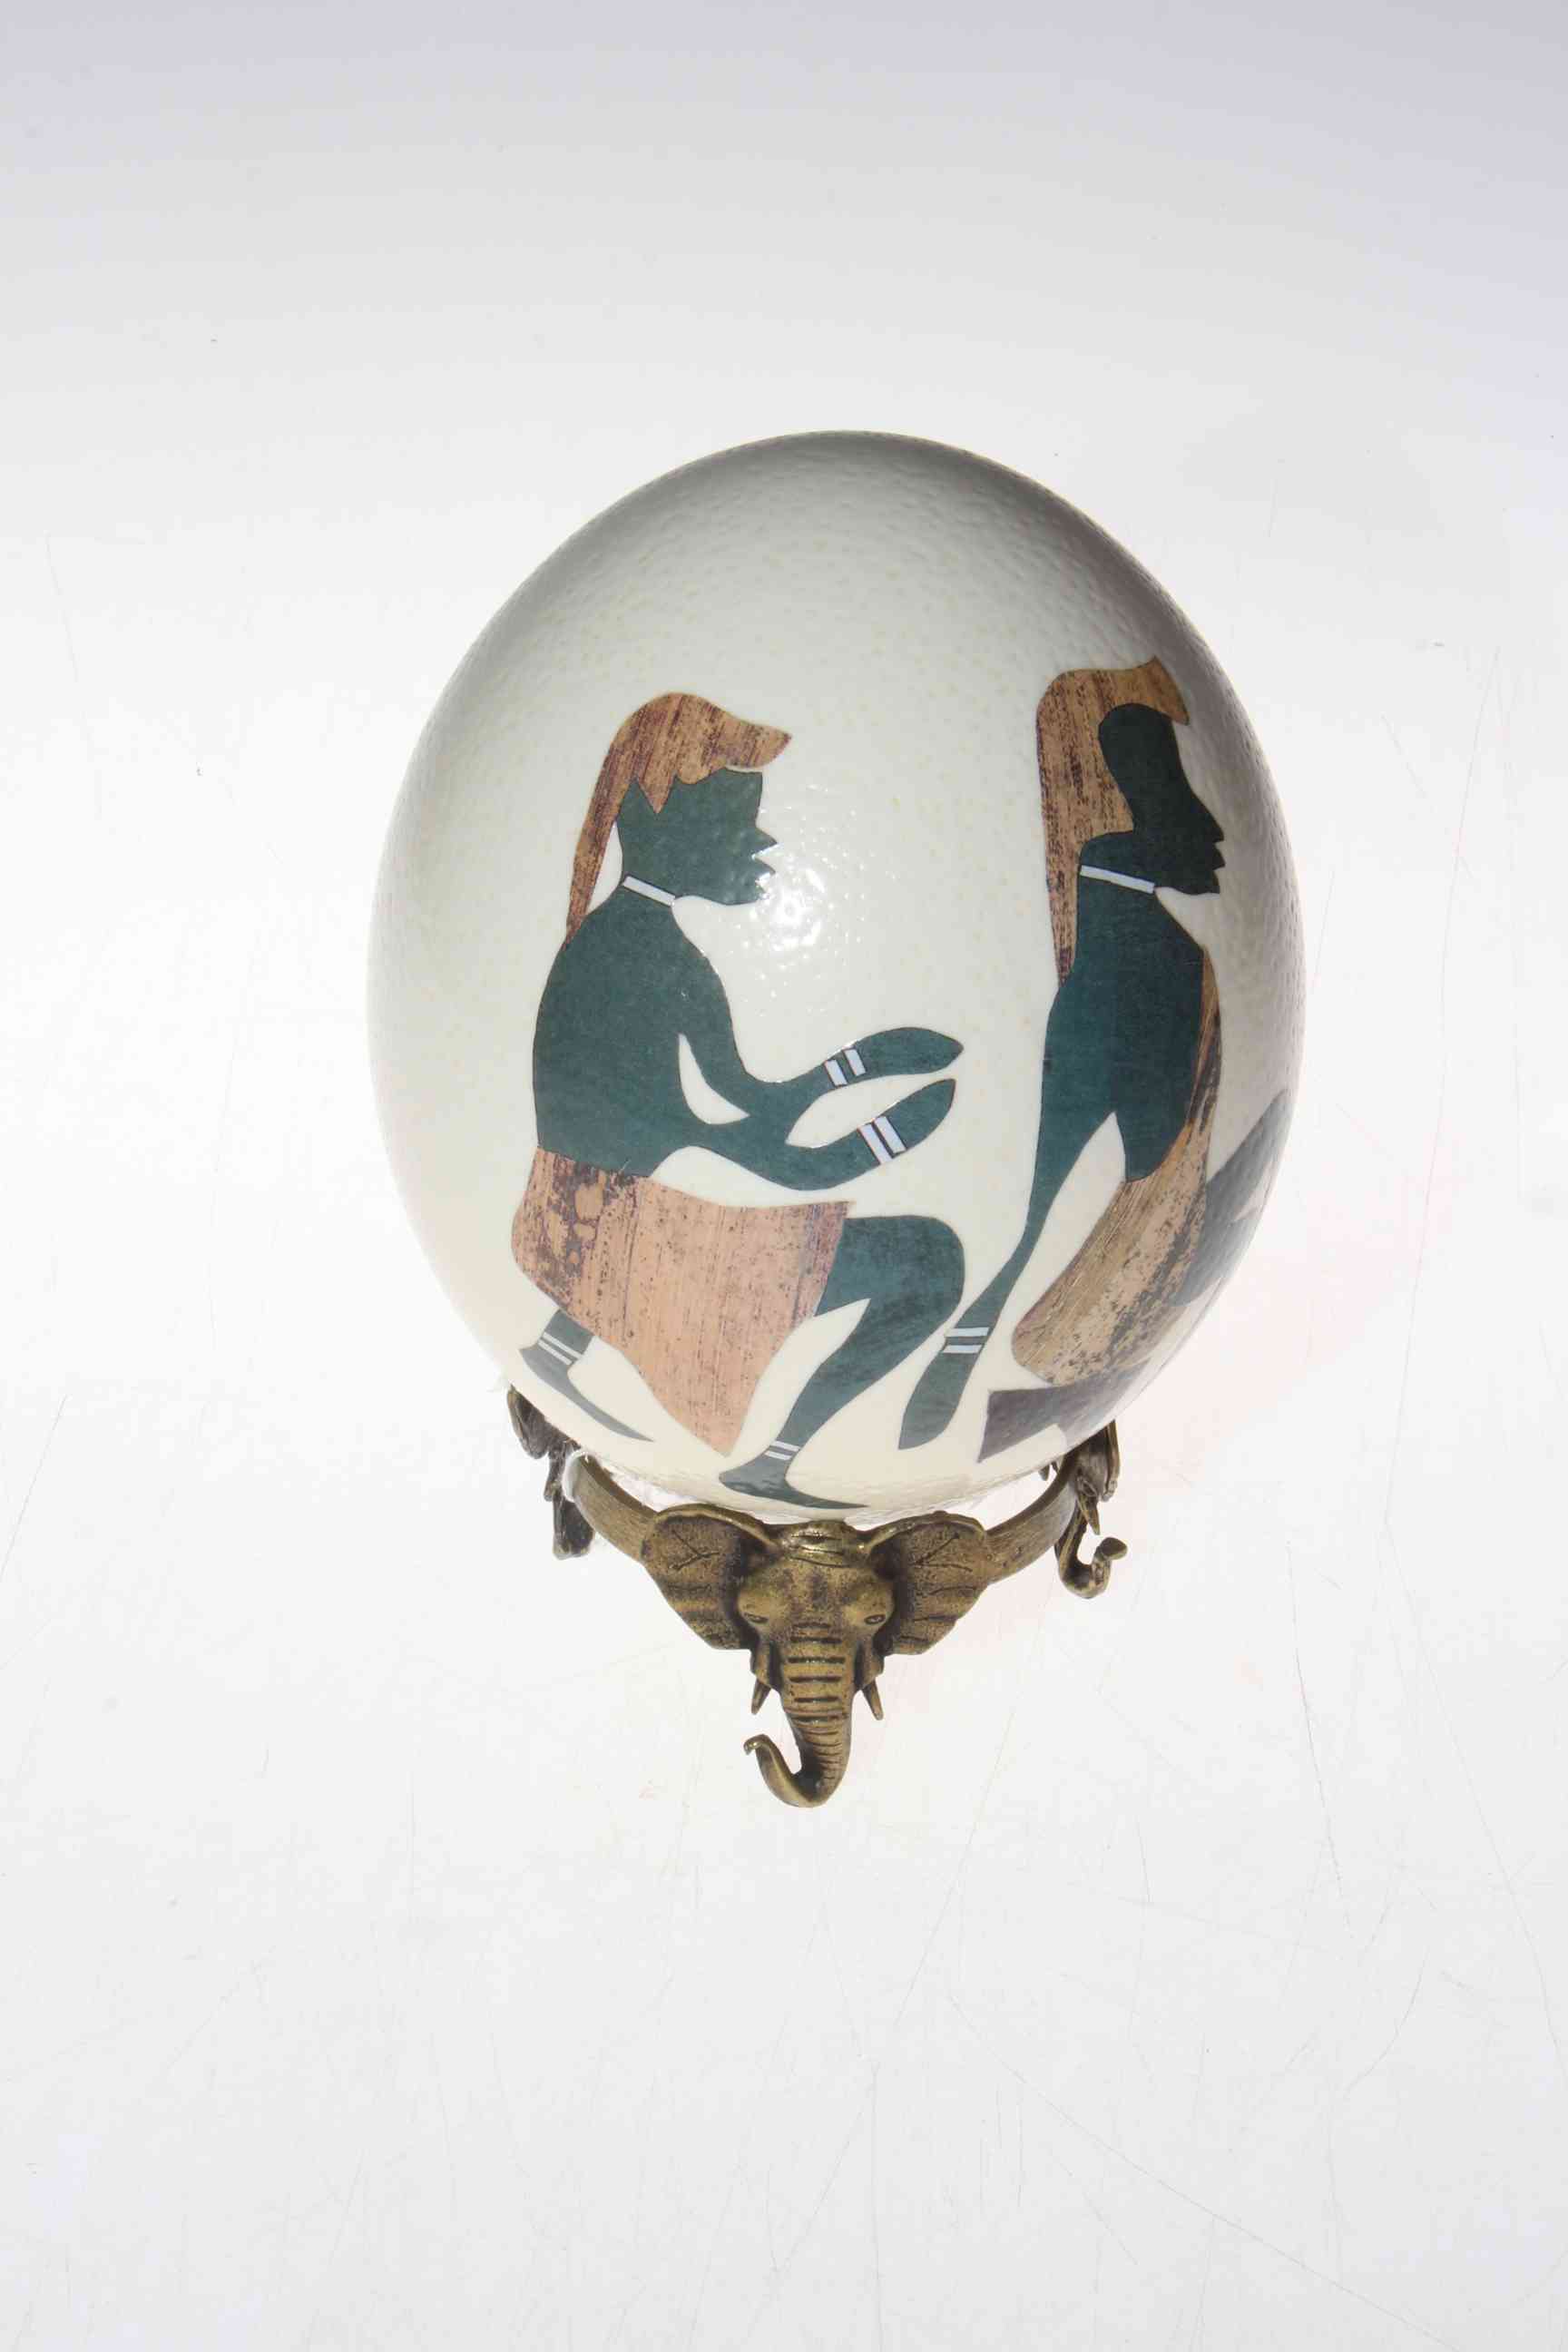 Ostrich egg decorated with figures on metal elephant mask stand.